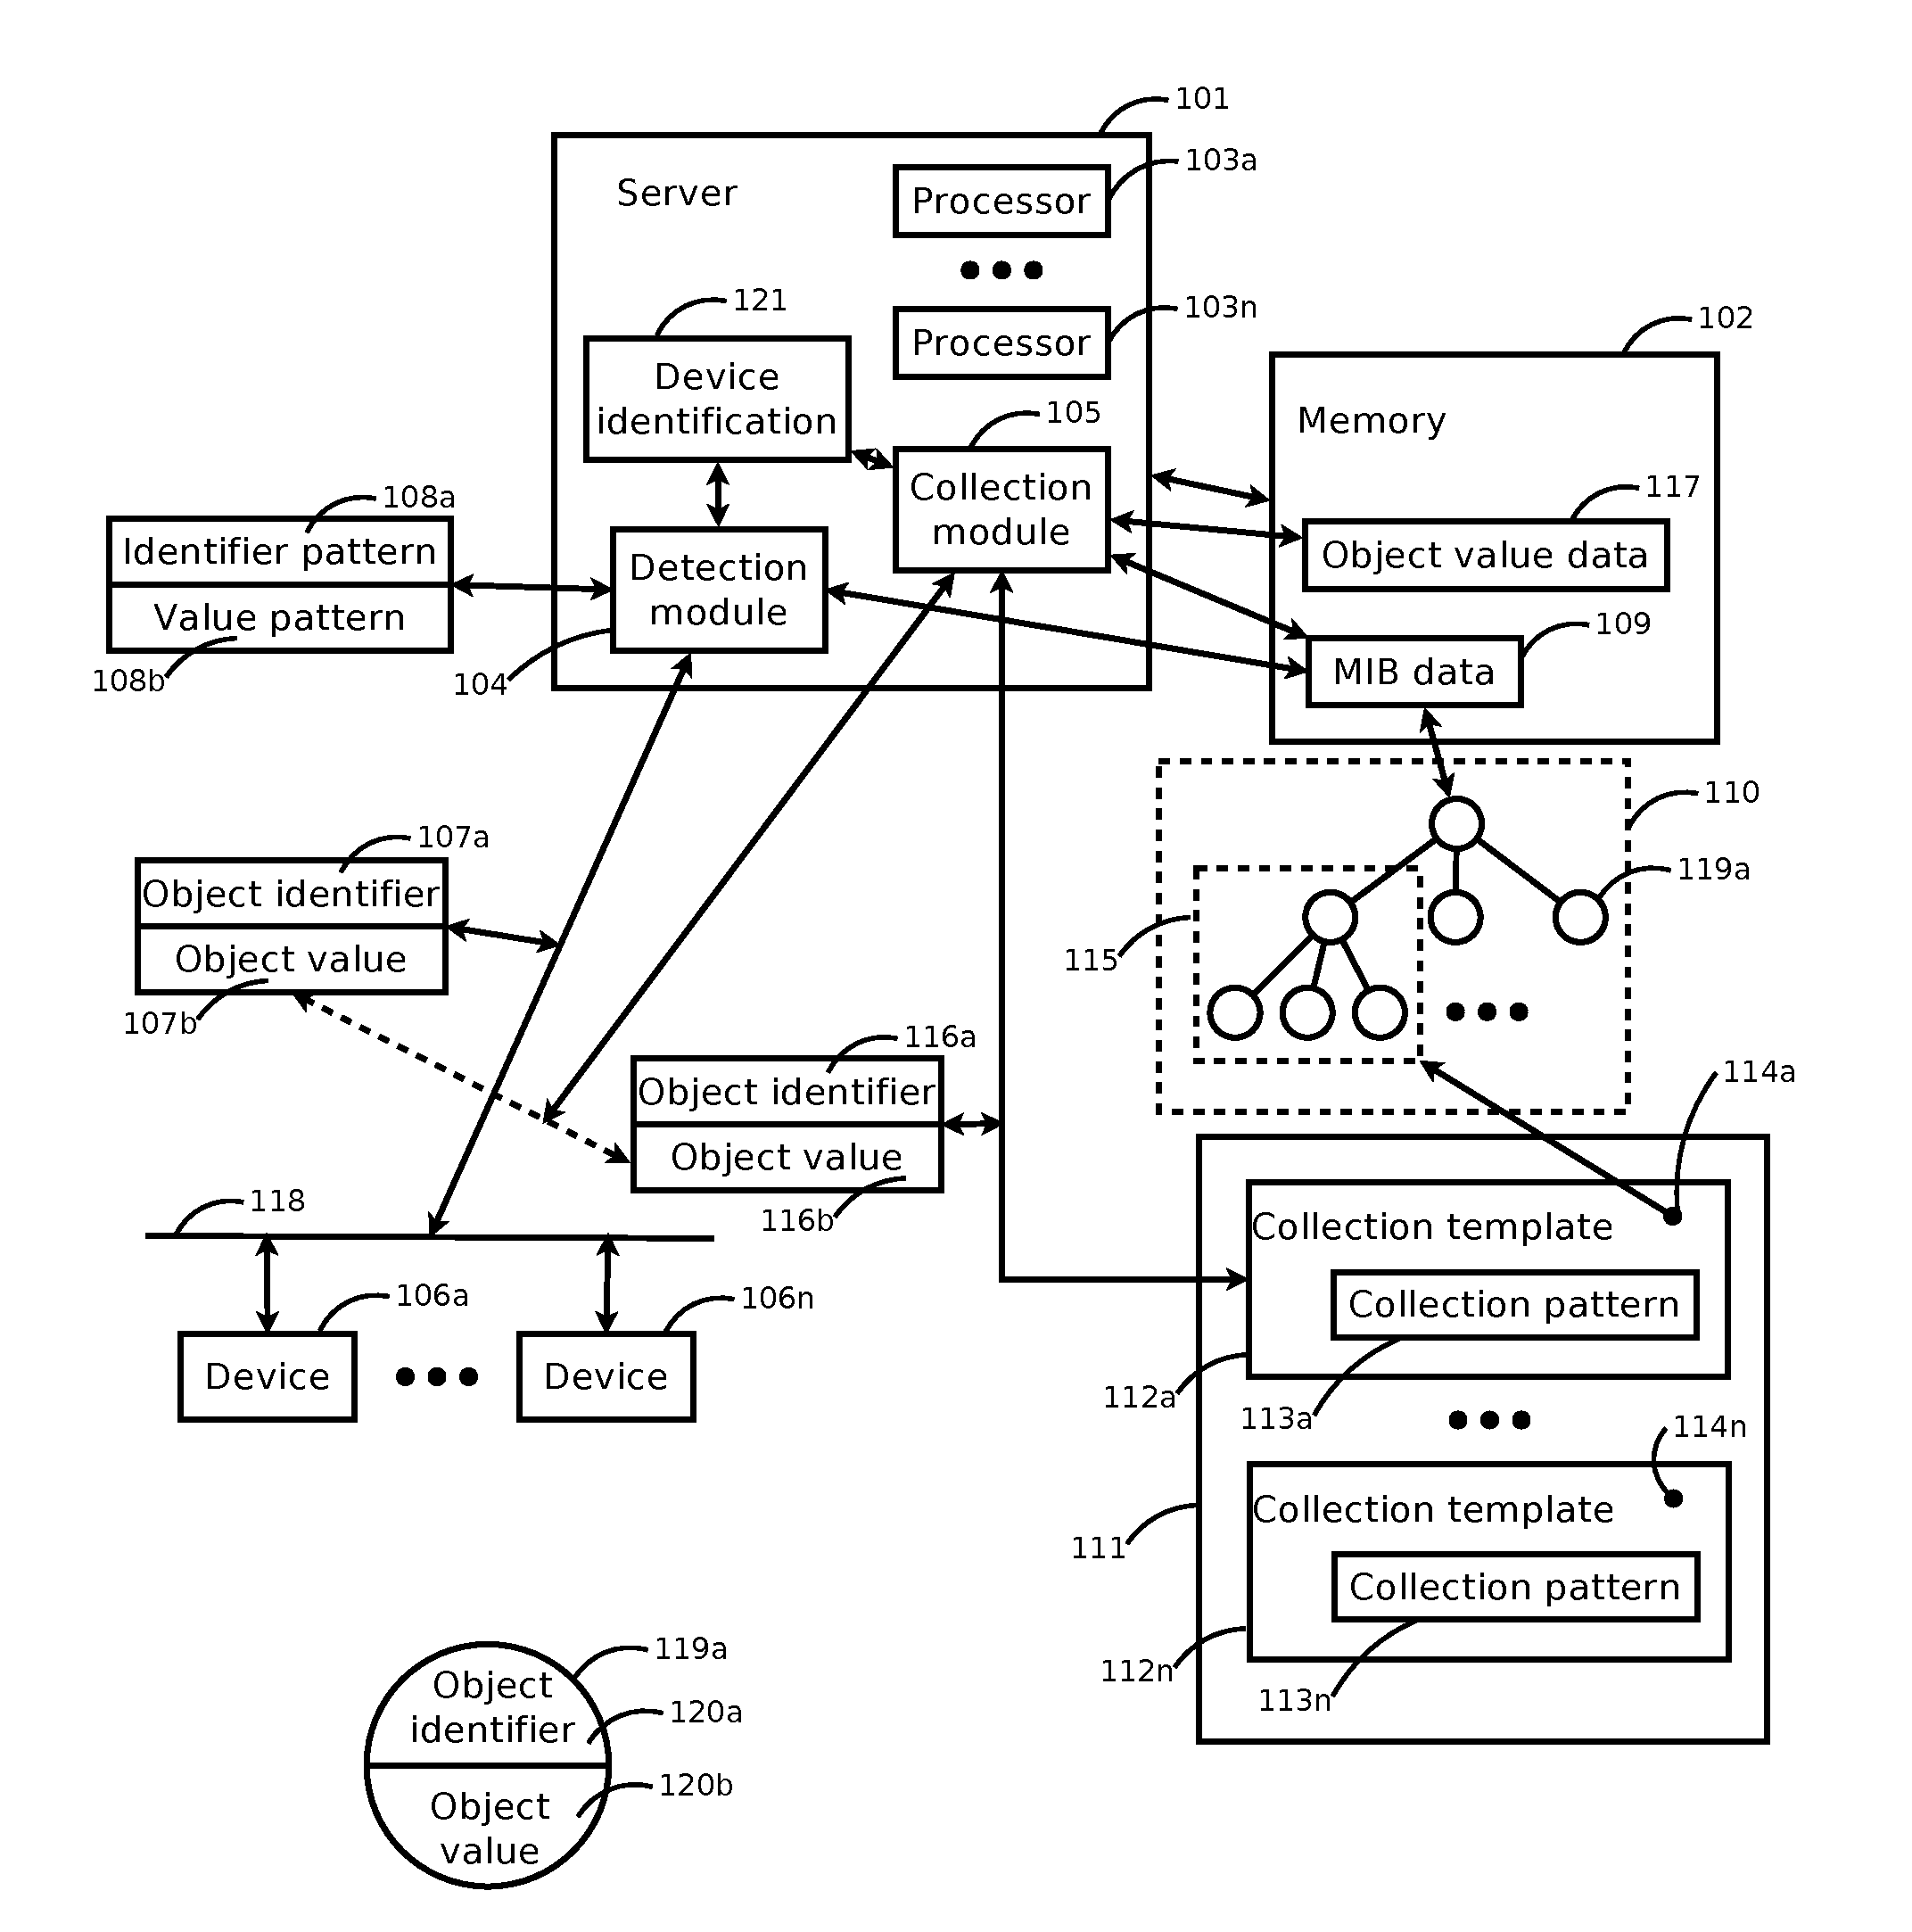 Systems and methods for discovering and monitoring devices using search patterns for object identifiers and values